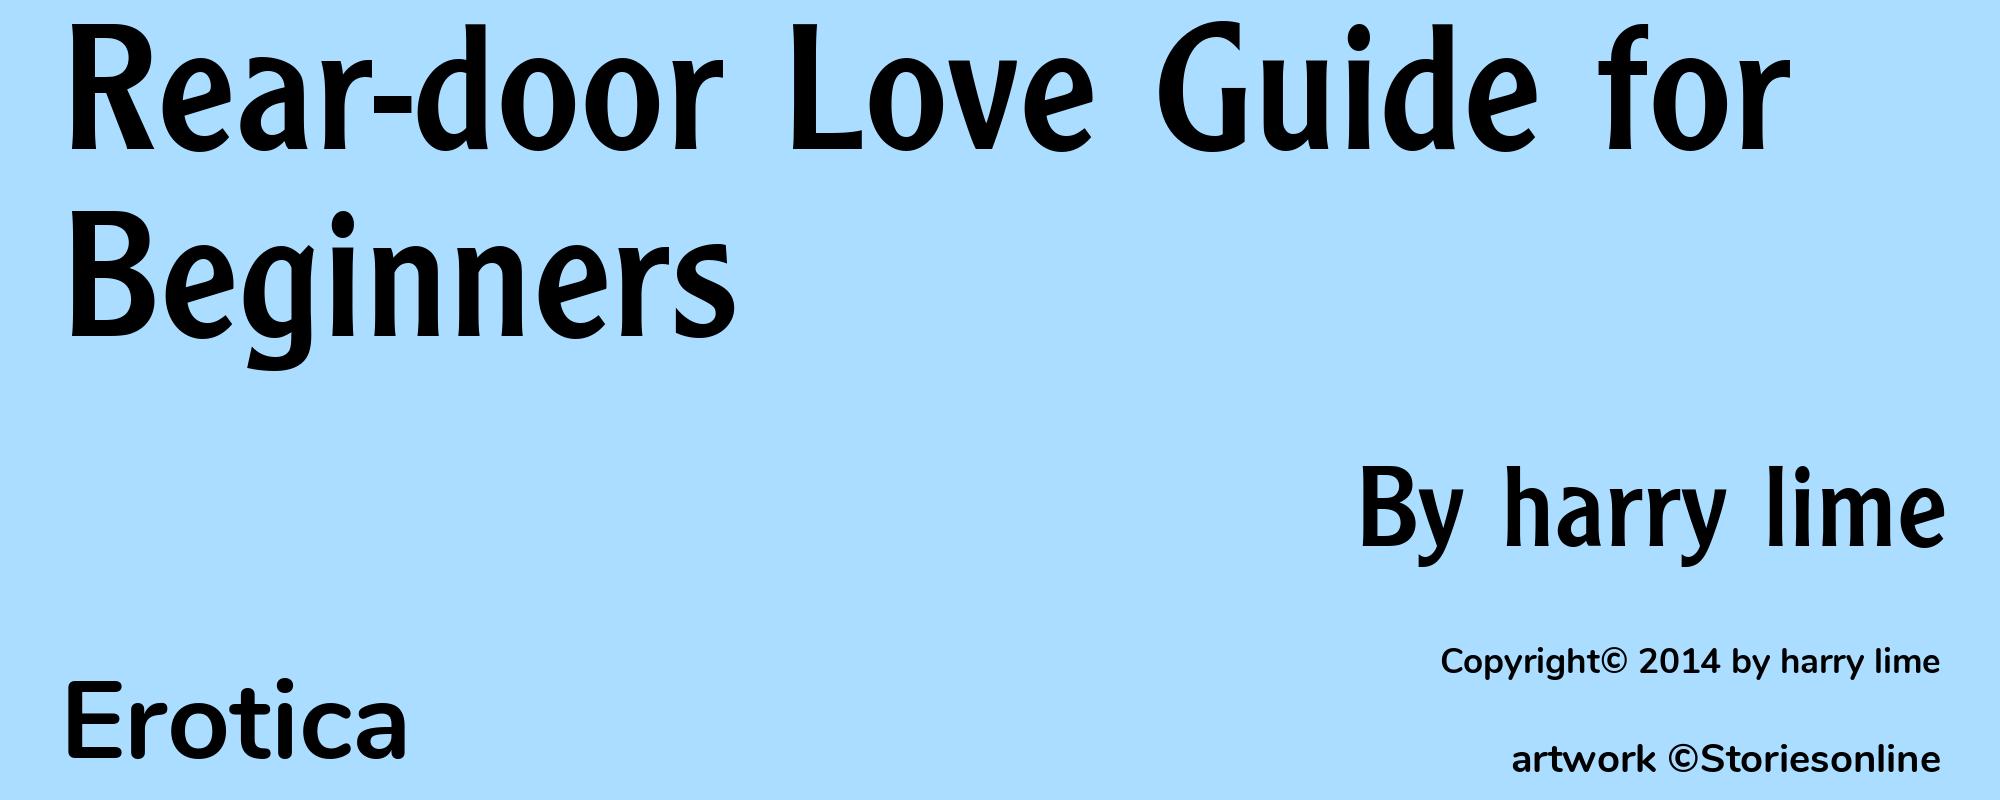 Rear-door Love Guide for Beginners - Cover